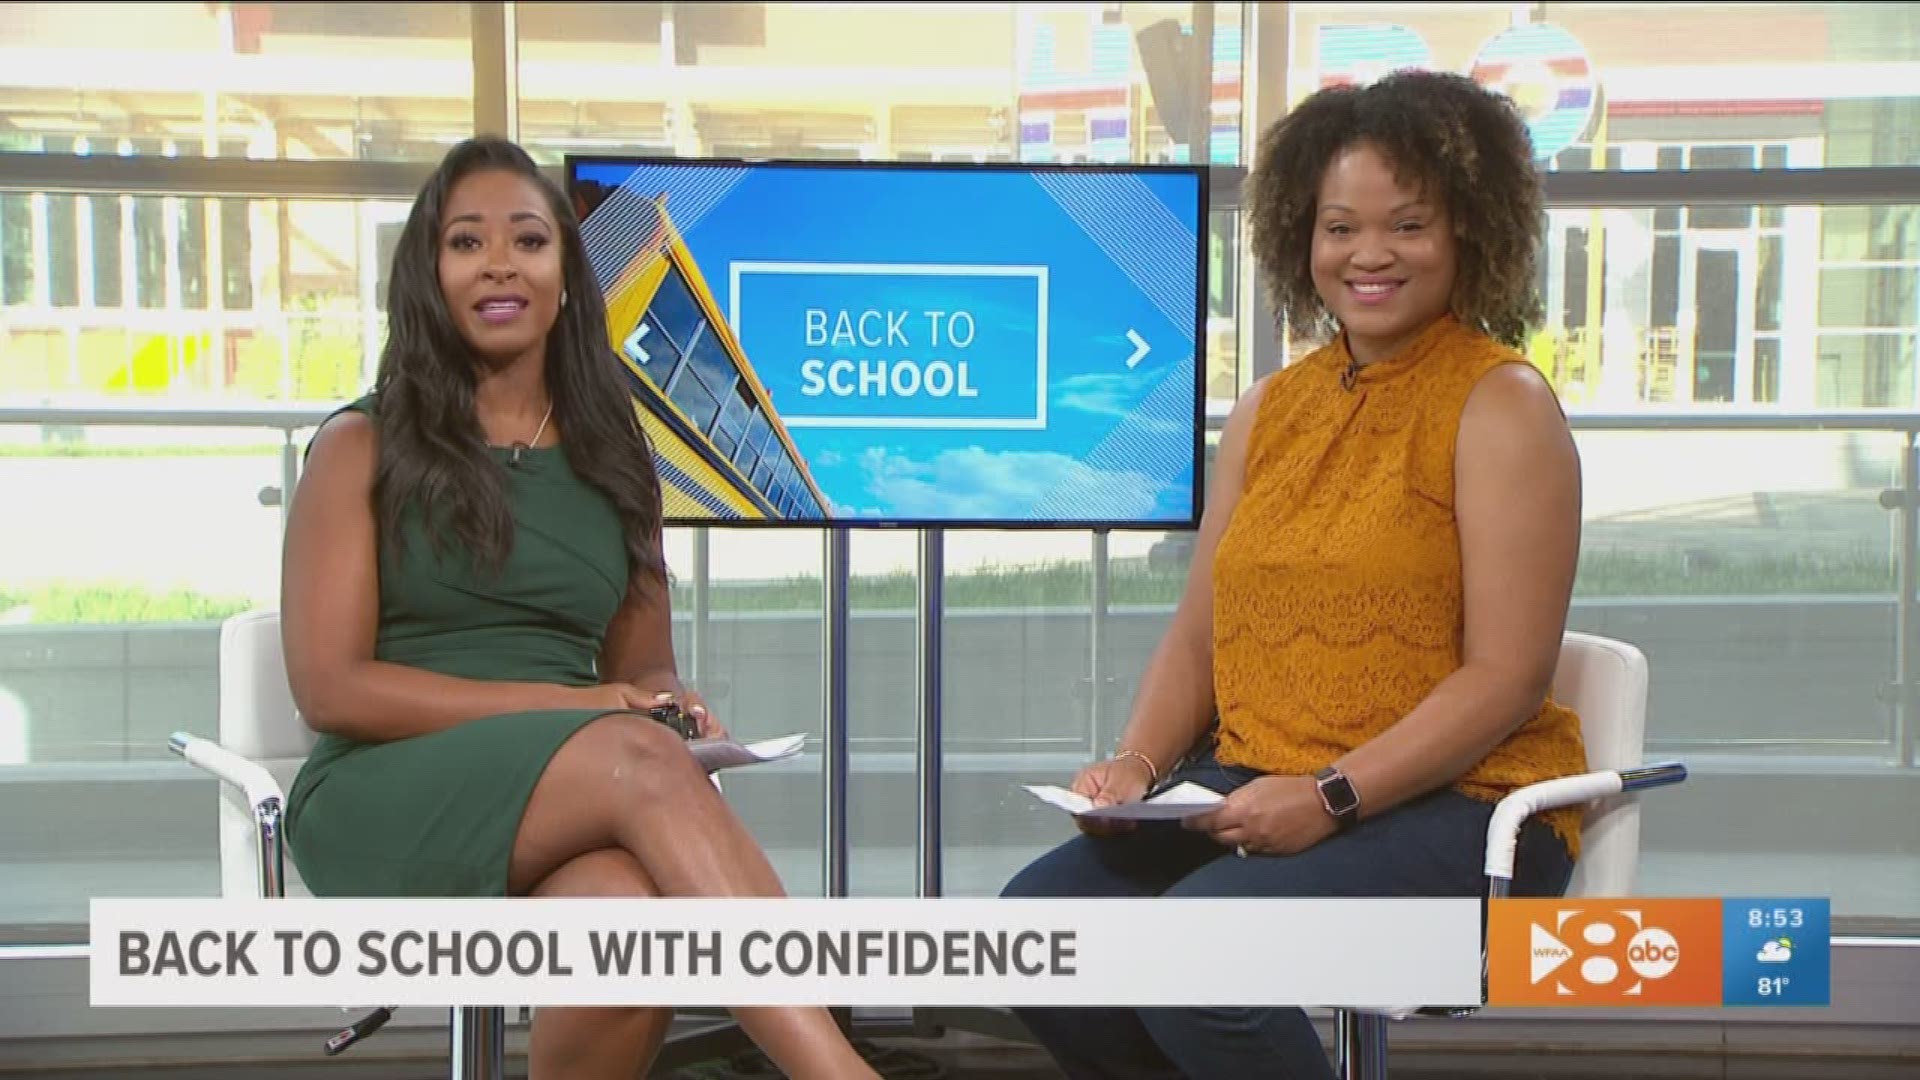 Licensed professional counselor "Coach Keisha" Gaddis talks about how to build confidence in students as they head back to school.